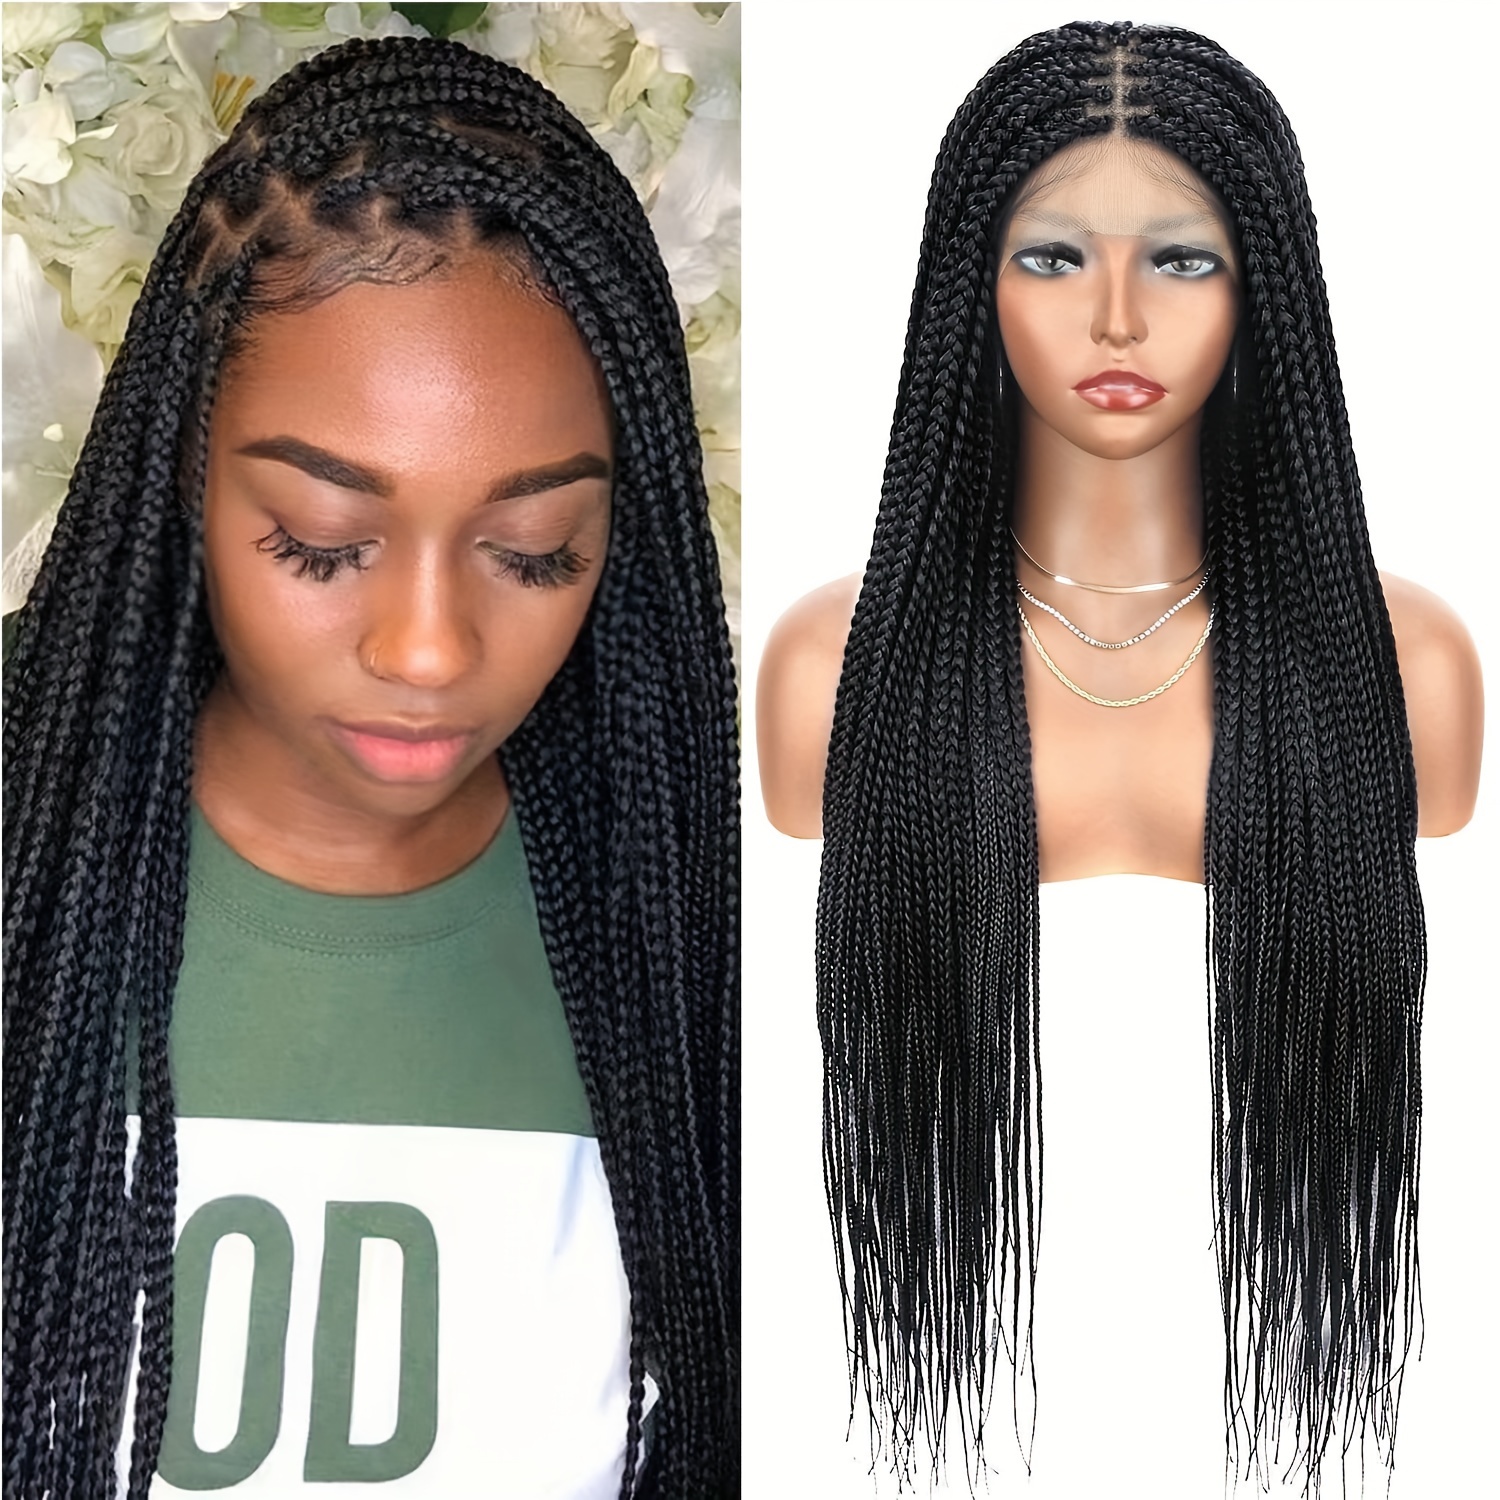  WEEWEE Box Braided Wigs for Women,Mixed Brown Lace